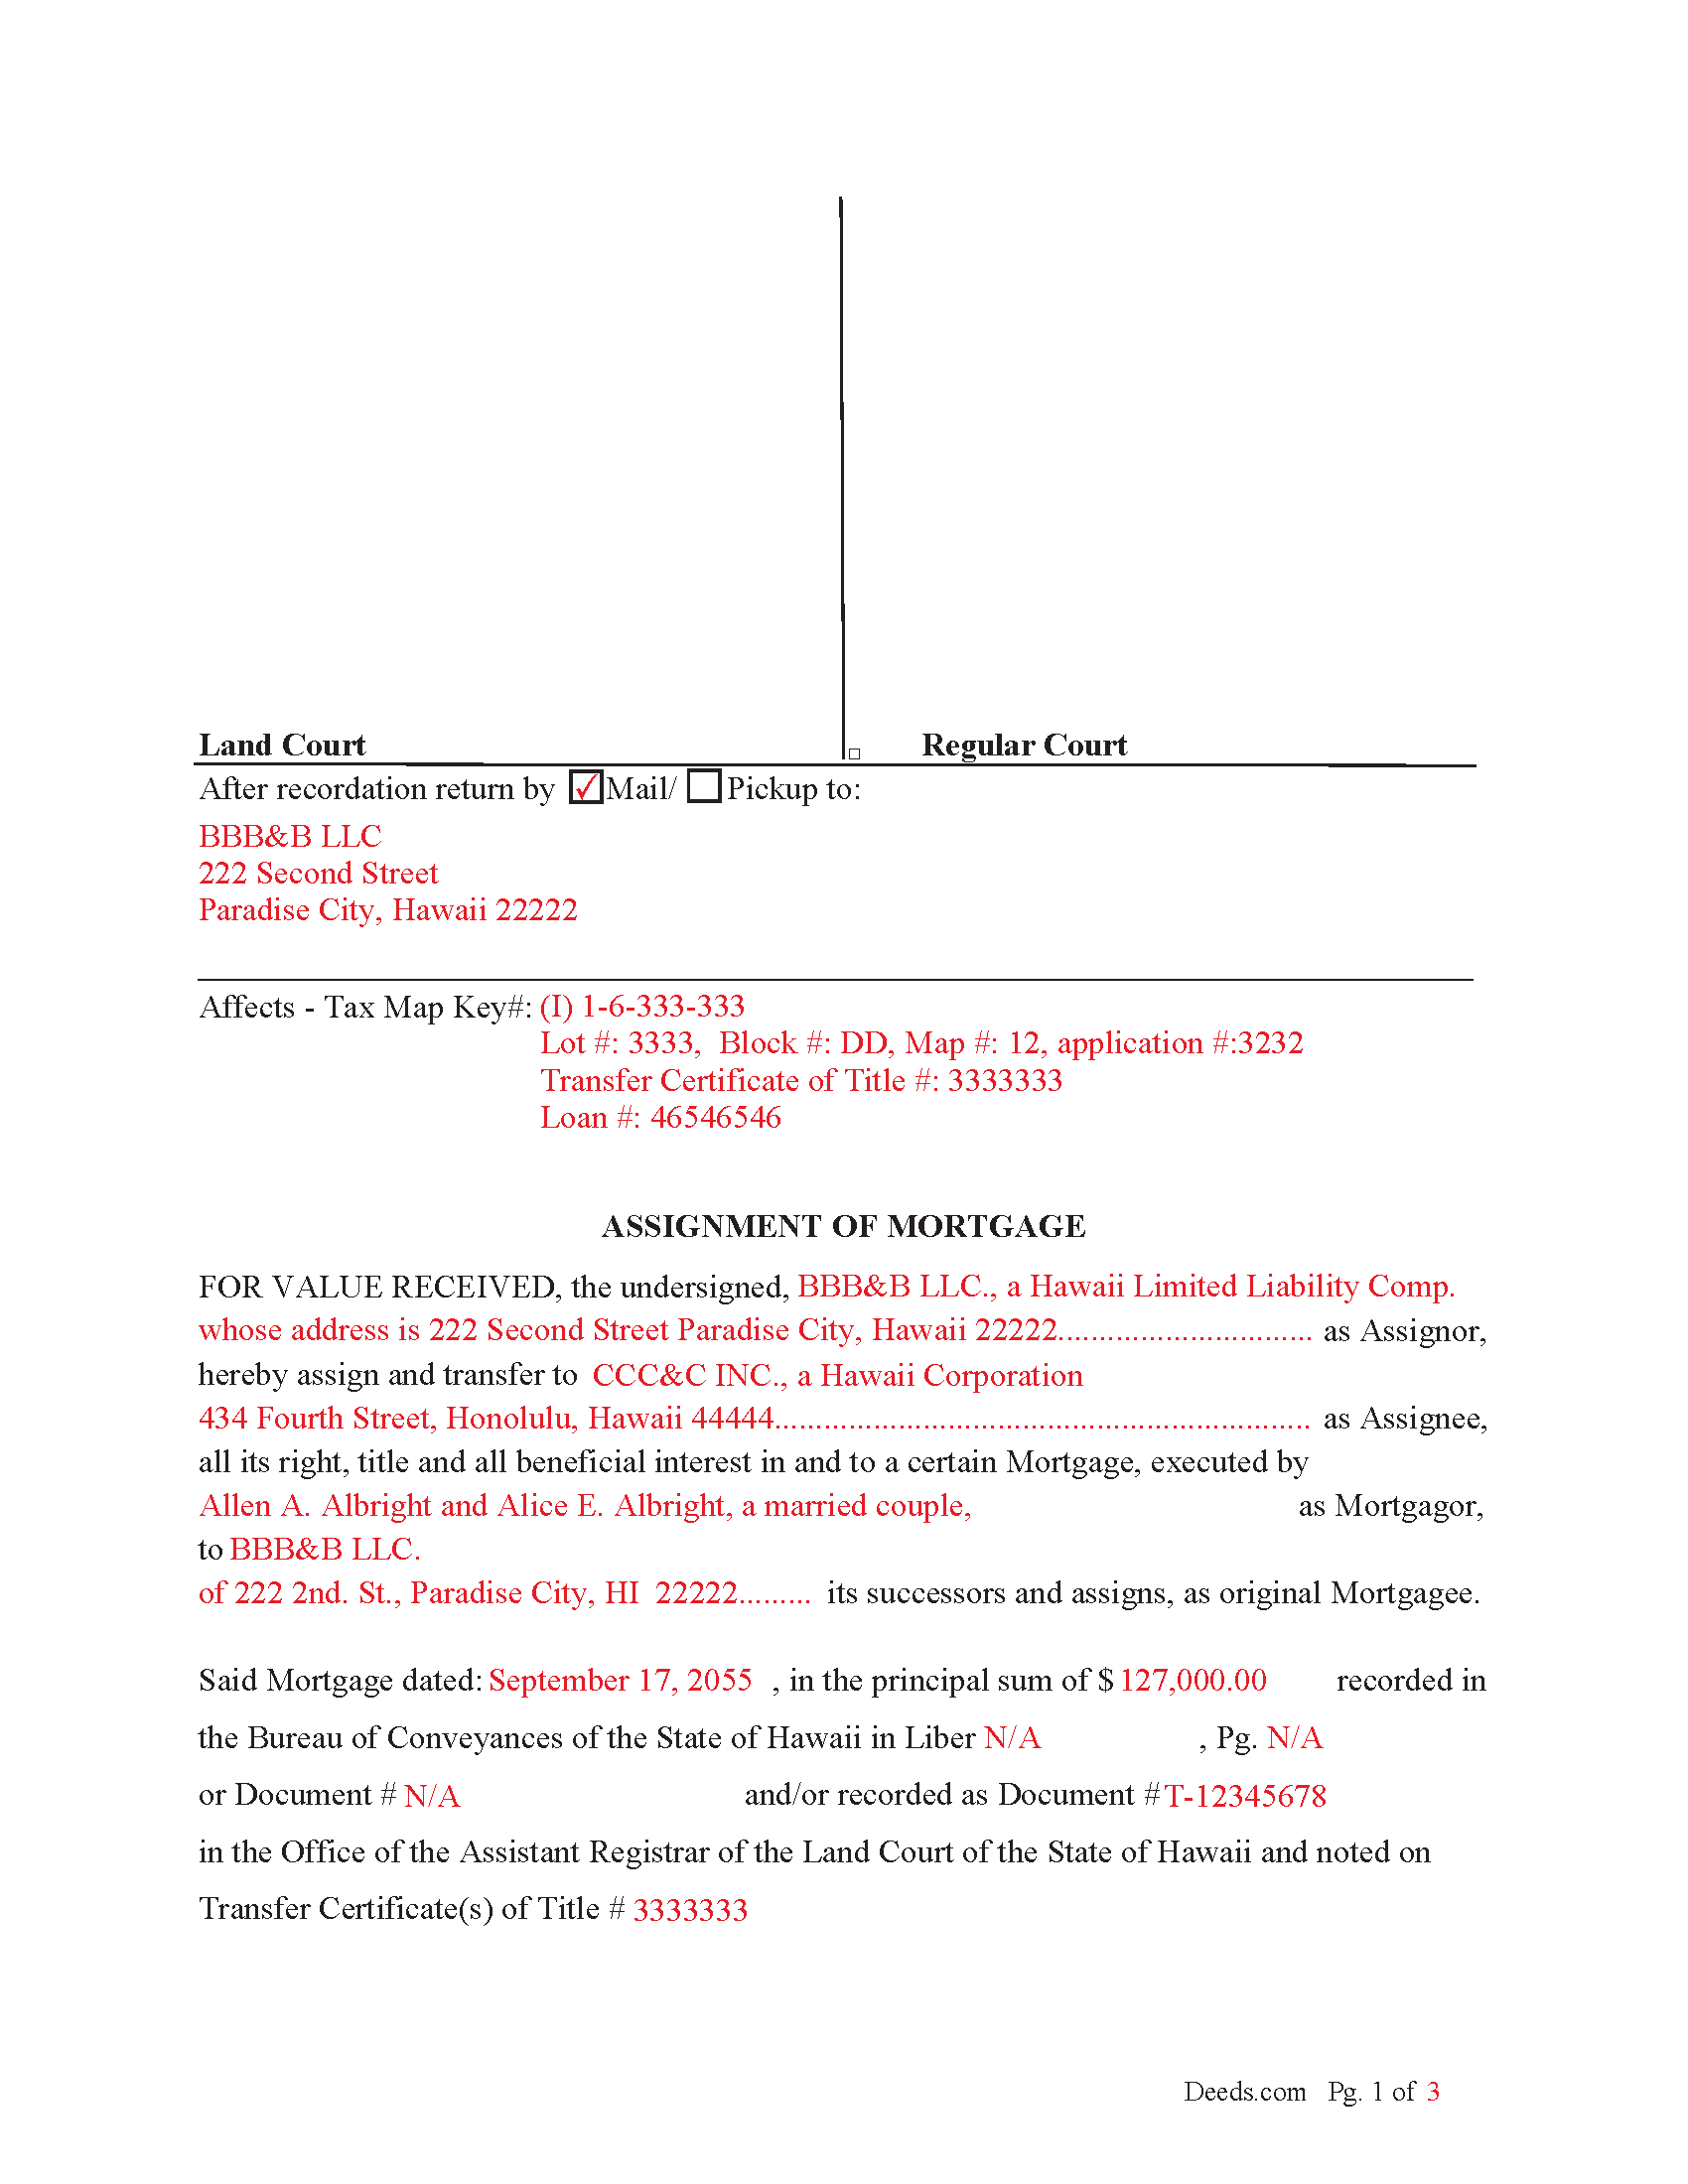 Completed Example of an Assignment of Mortgage Document